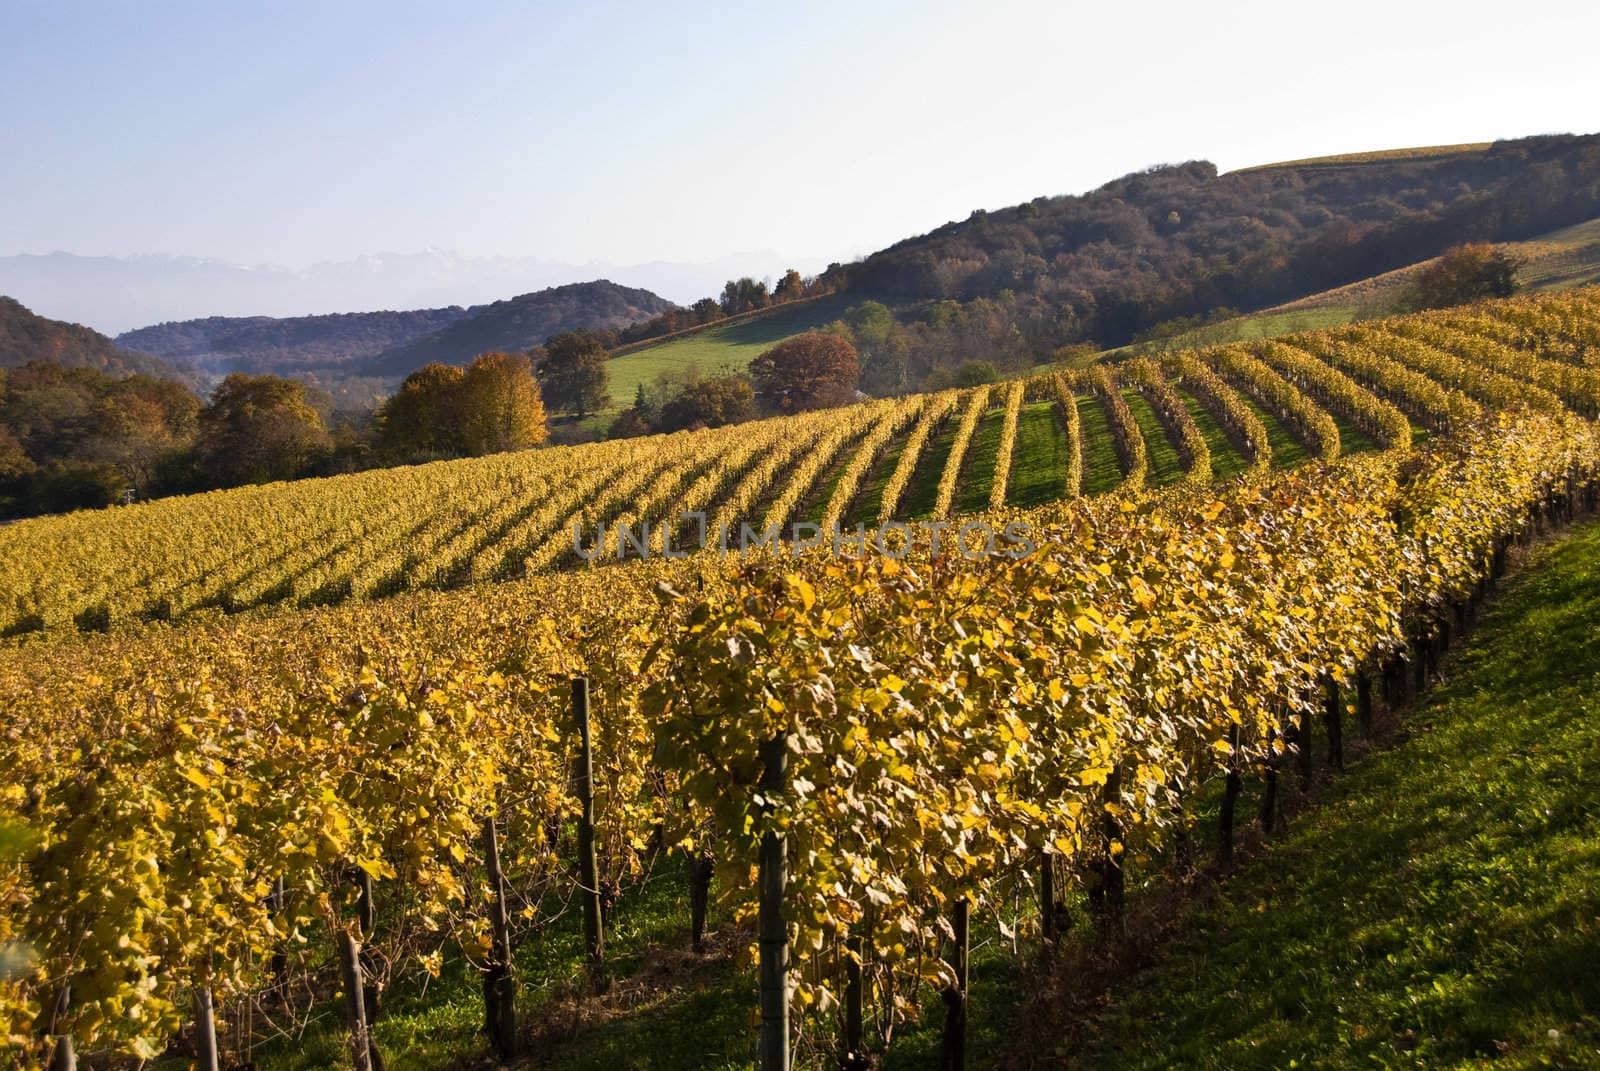 The vineyards in the Jurancon region of Southwest France, grow Gros Manseng and Petit Manseng grapes for sweet white wine.